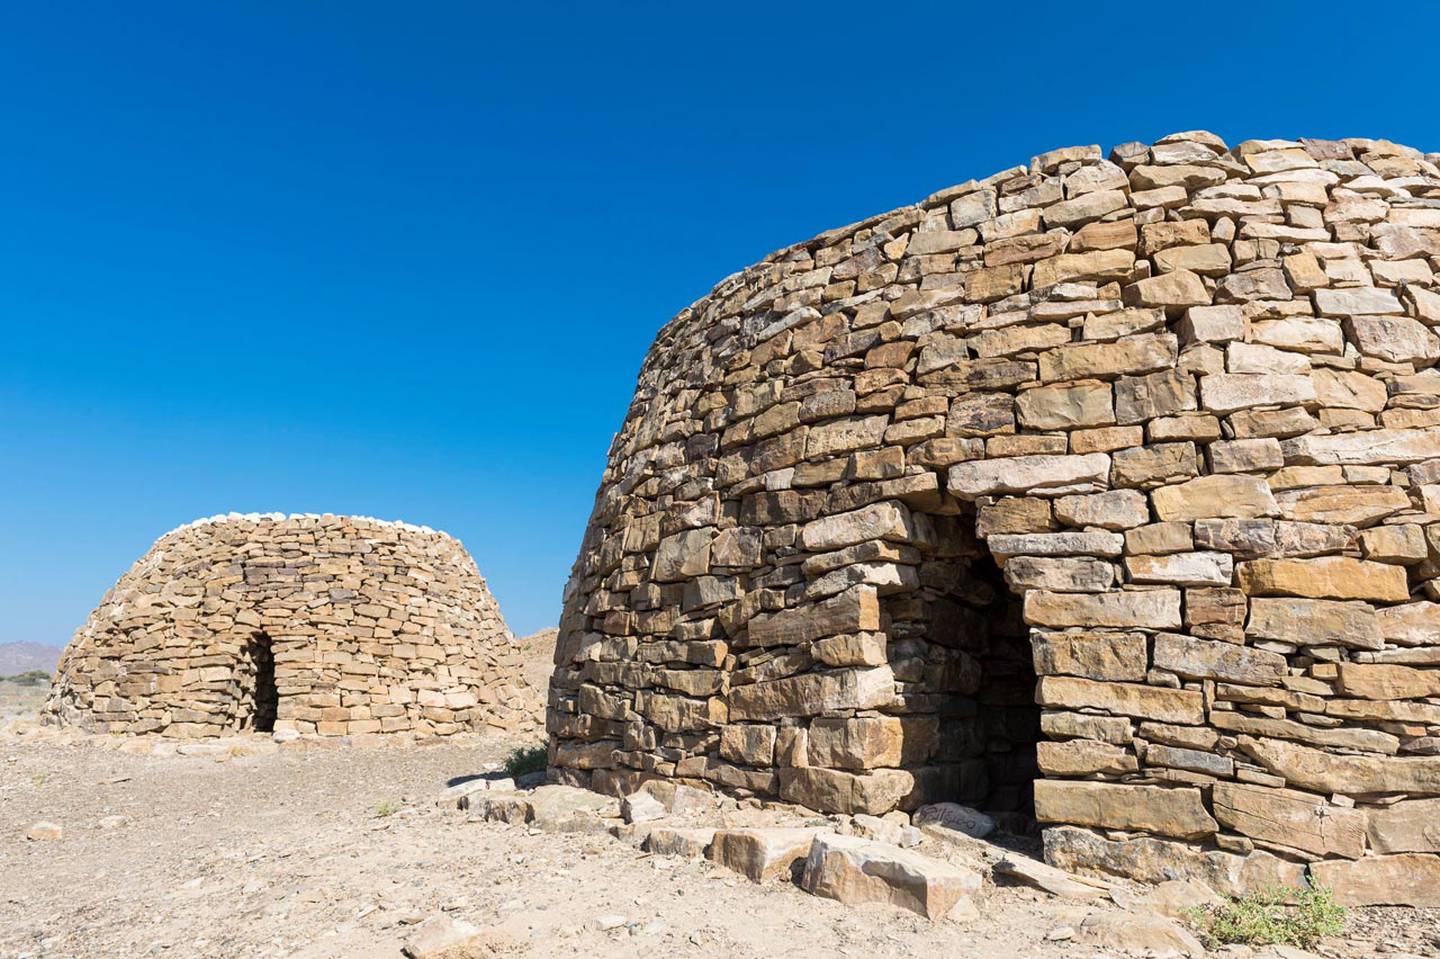 Archaeological sites of significance will be more easily accessible by the new road, like this house from the Bat era. Photo by Oman Observer